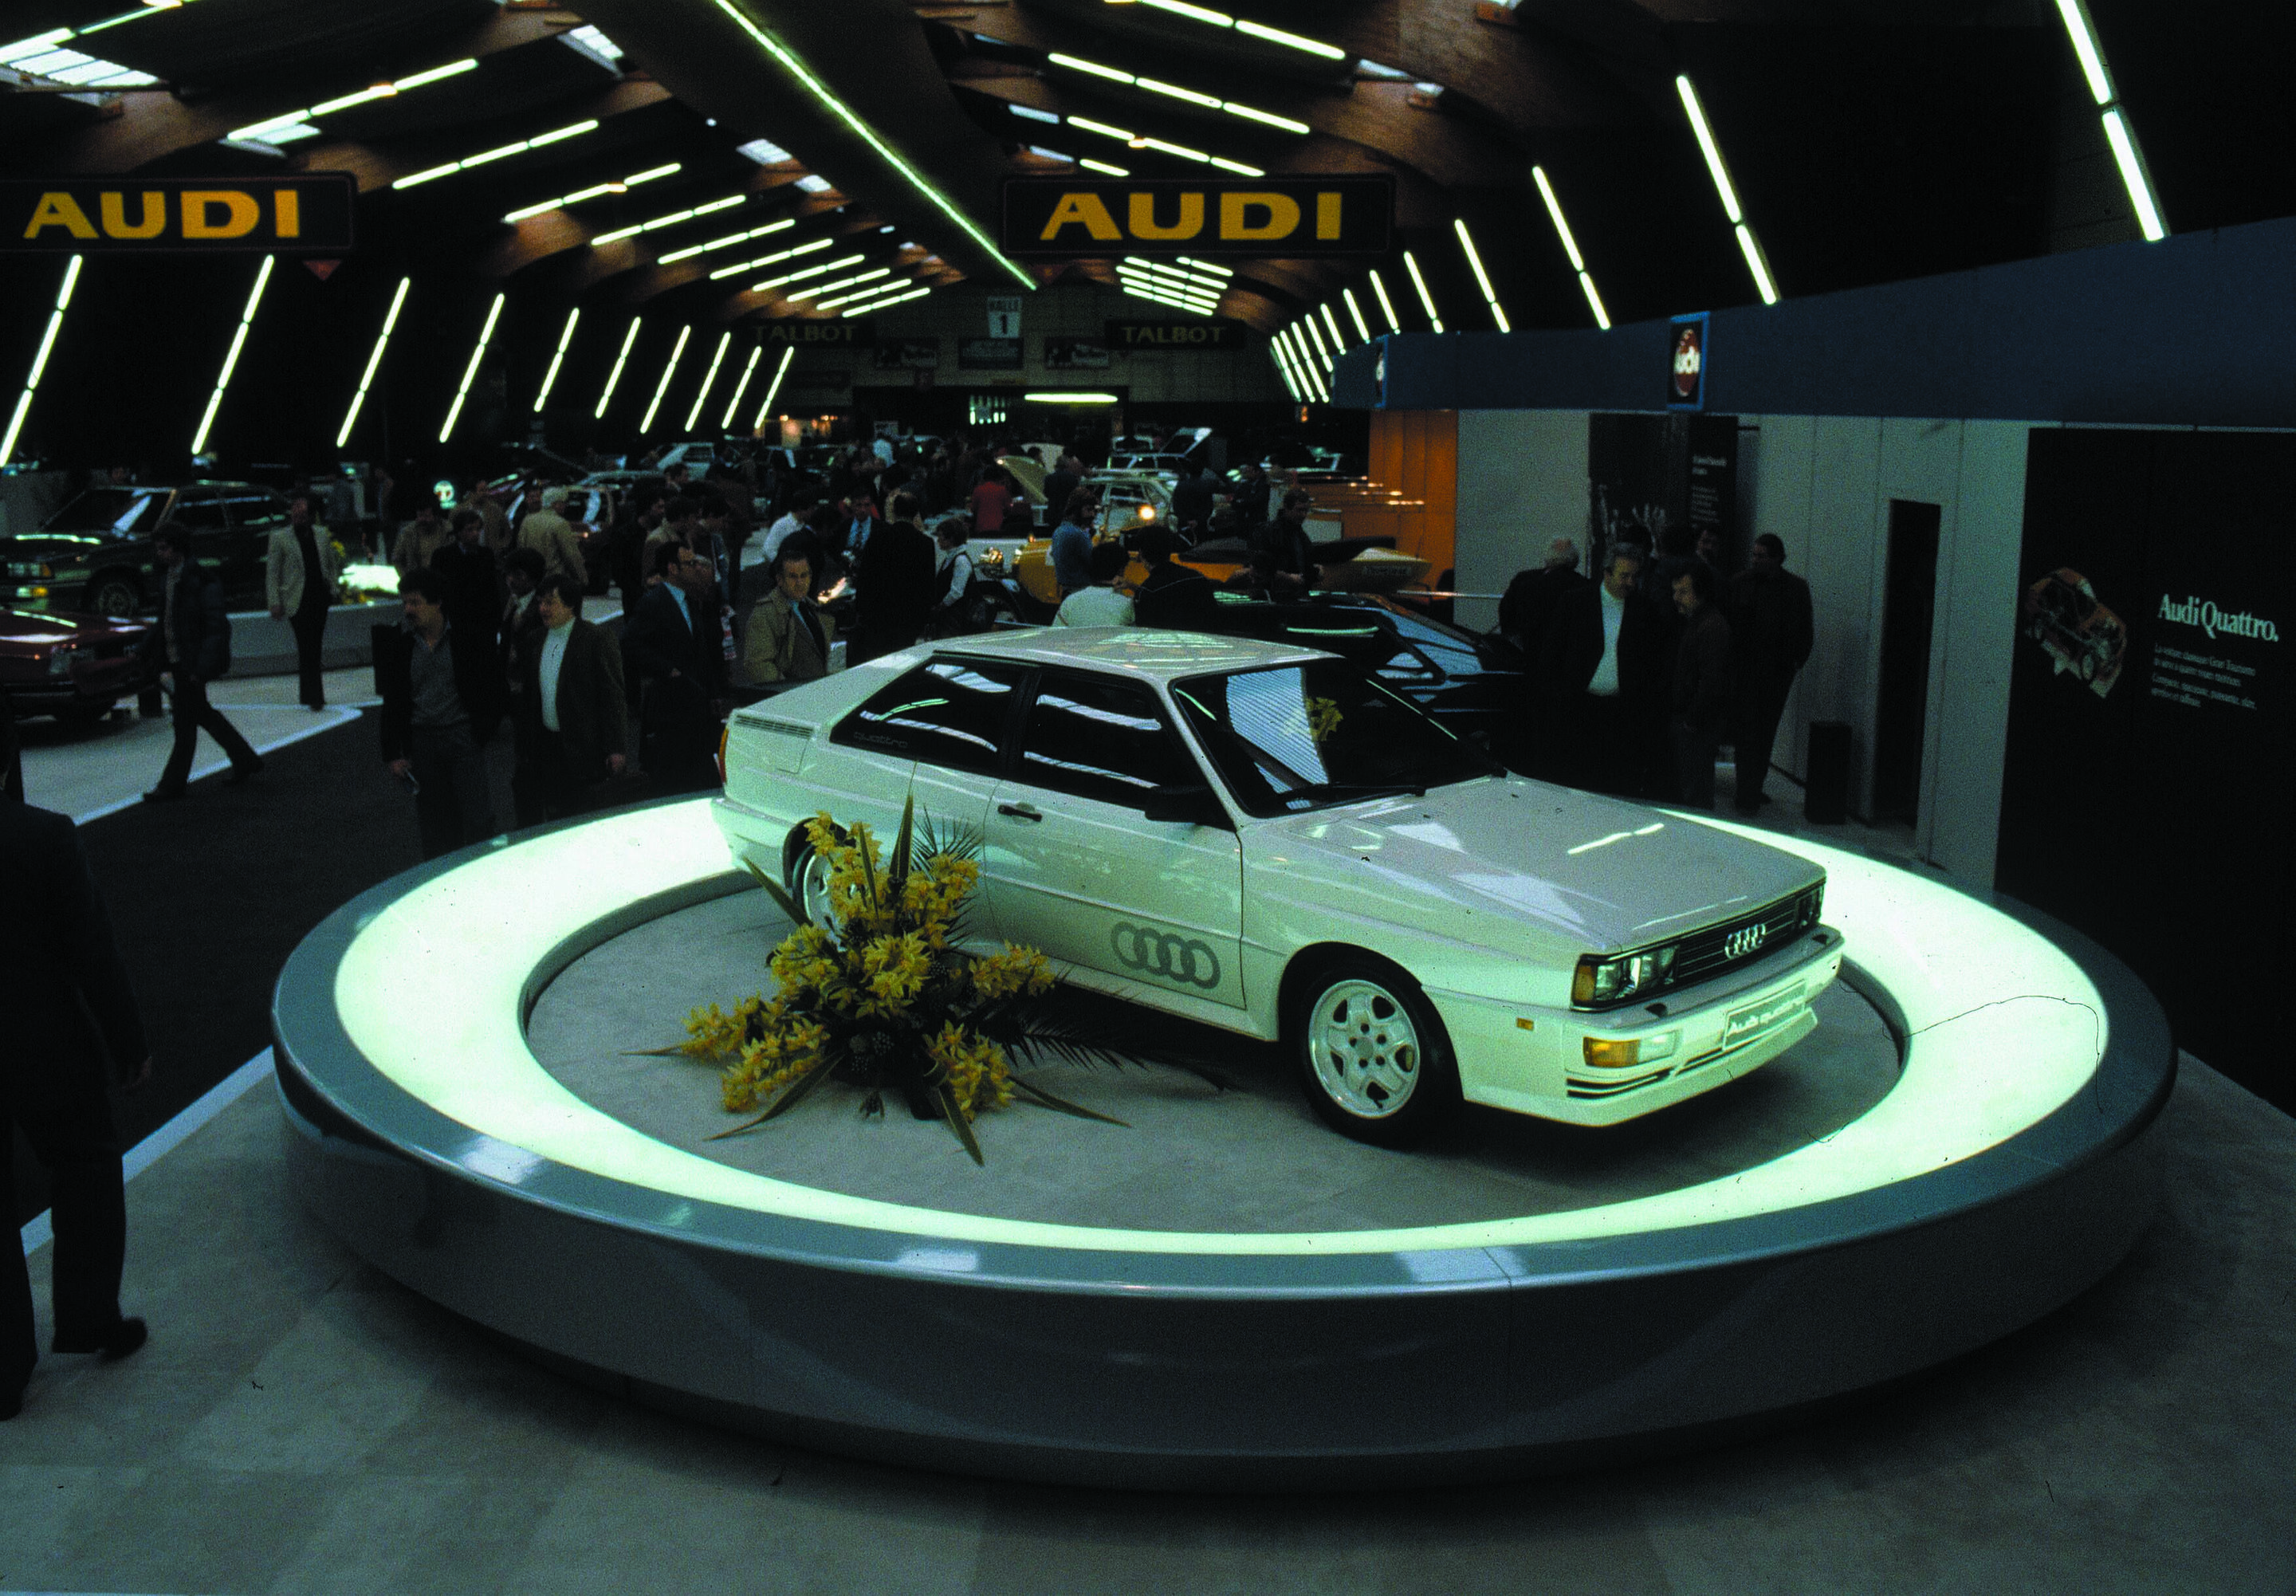 The start: First Audi quattro was presented at the Geneva Motorshow in march 1980